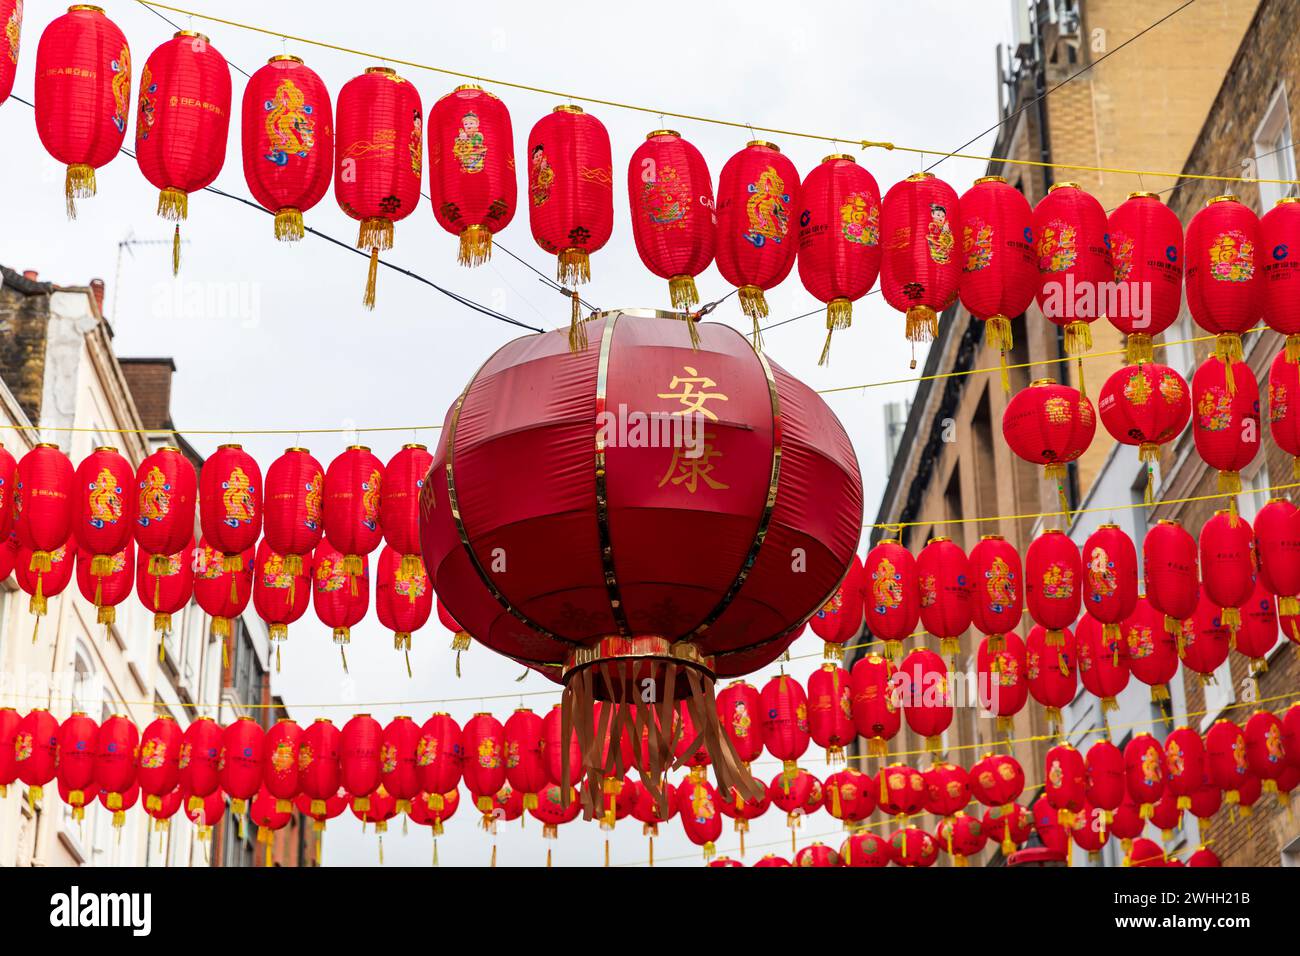 London, UK. 10th Feb 2024. Chinese Lanterns decorate the streets around London's China Town to celebrate Chinese New Year (Year of the Dragon). The Chinese zodiac is a repeating 12-year cycle of animal signs based on the lunar calendar. The Lunar New Year marks the transition from one animal to another. Credit: Stuart Robertson/Alamy Live News. Stock Photo